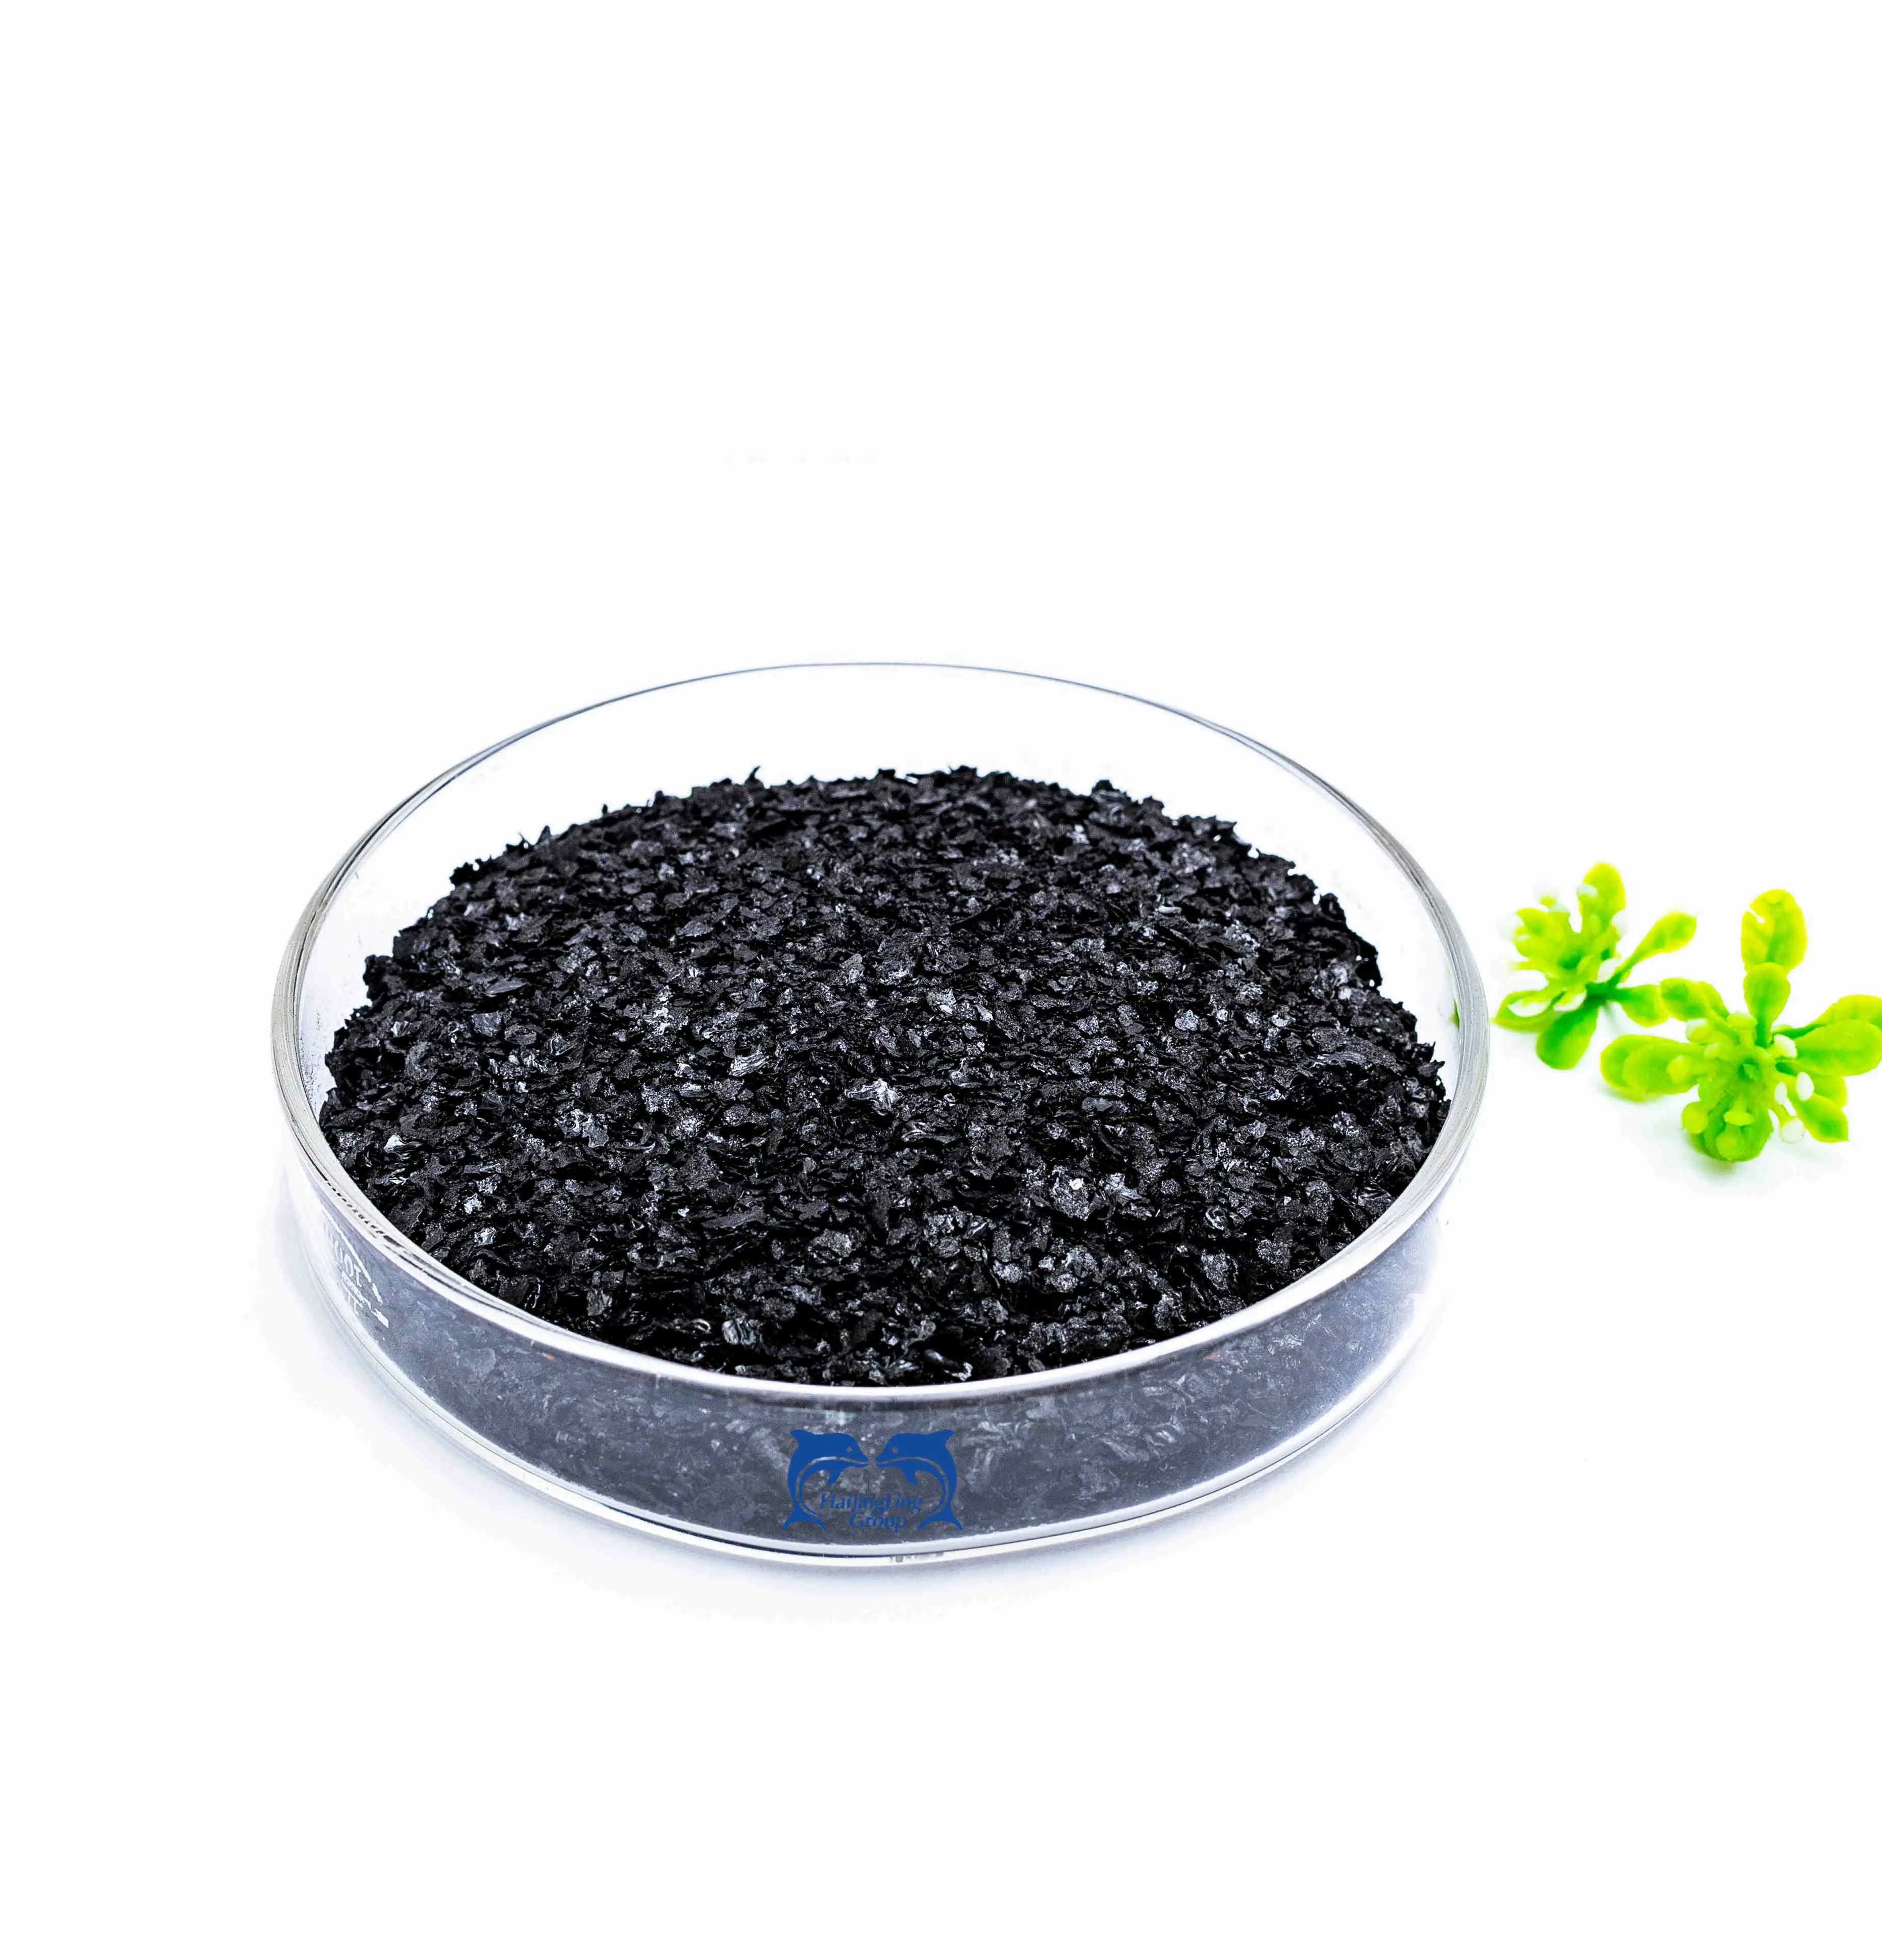 The extract of black seaweed flakes is rich in cytokinins and nutrients to improve the soil